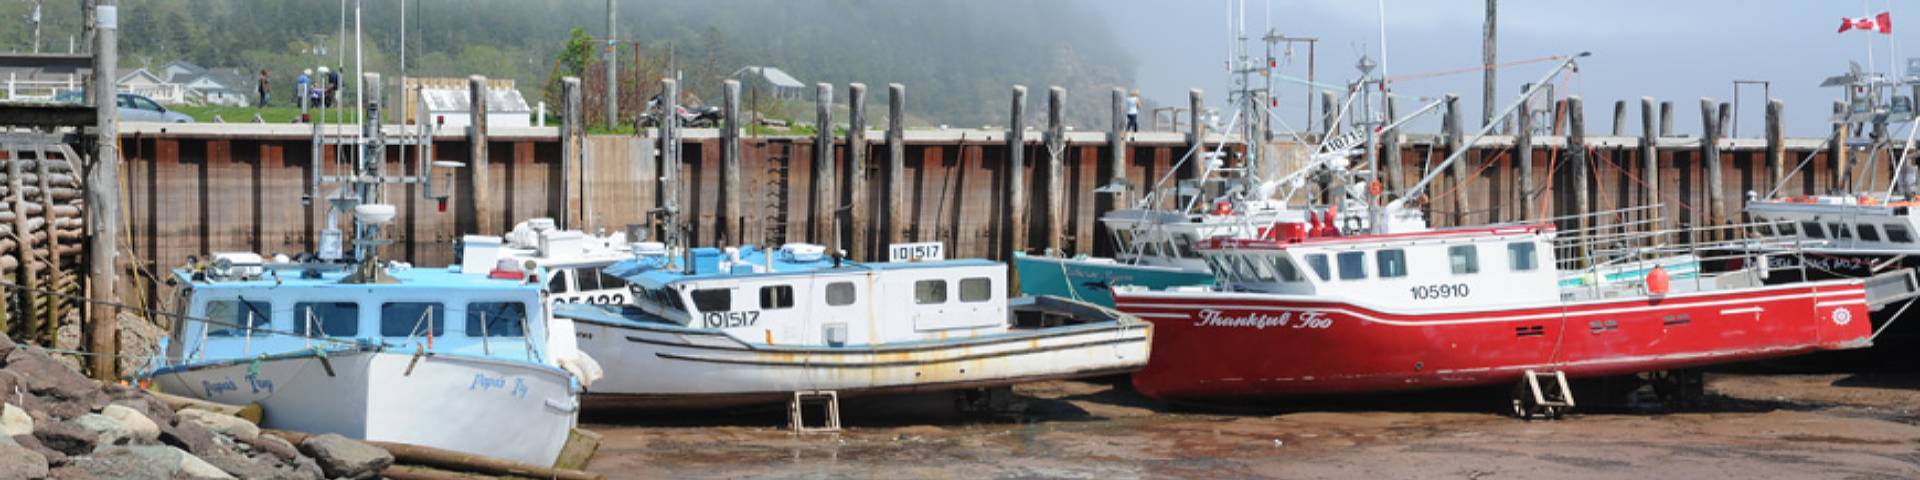 Fishing boats of the Alma village warf sitting on the ocean floor at low tide"